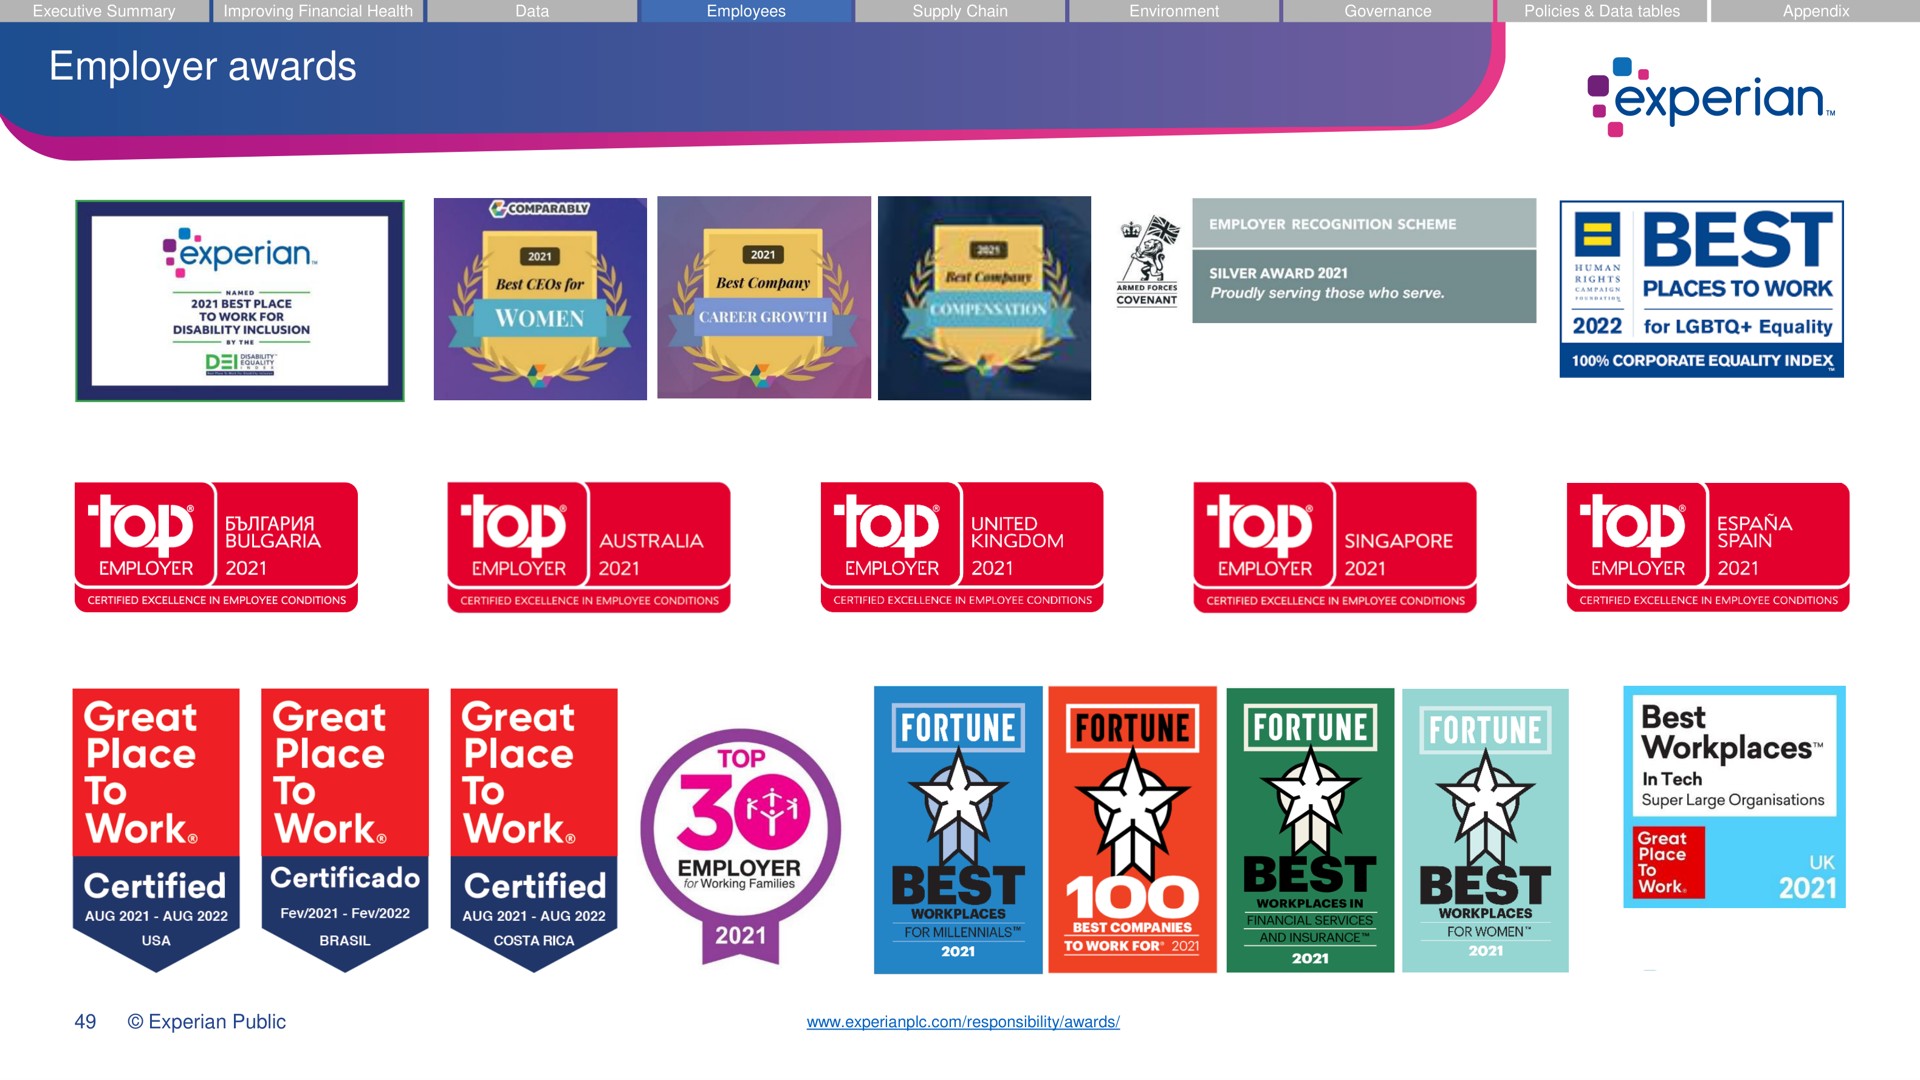 employer awards best great place to work great place to work great place to best workplaces | Experian